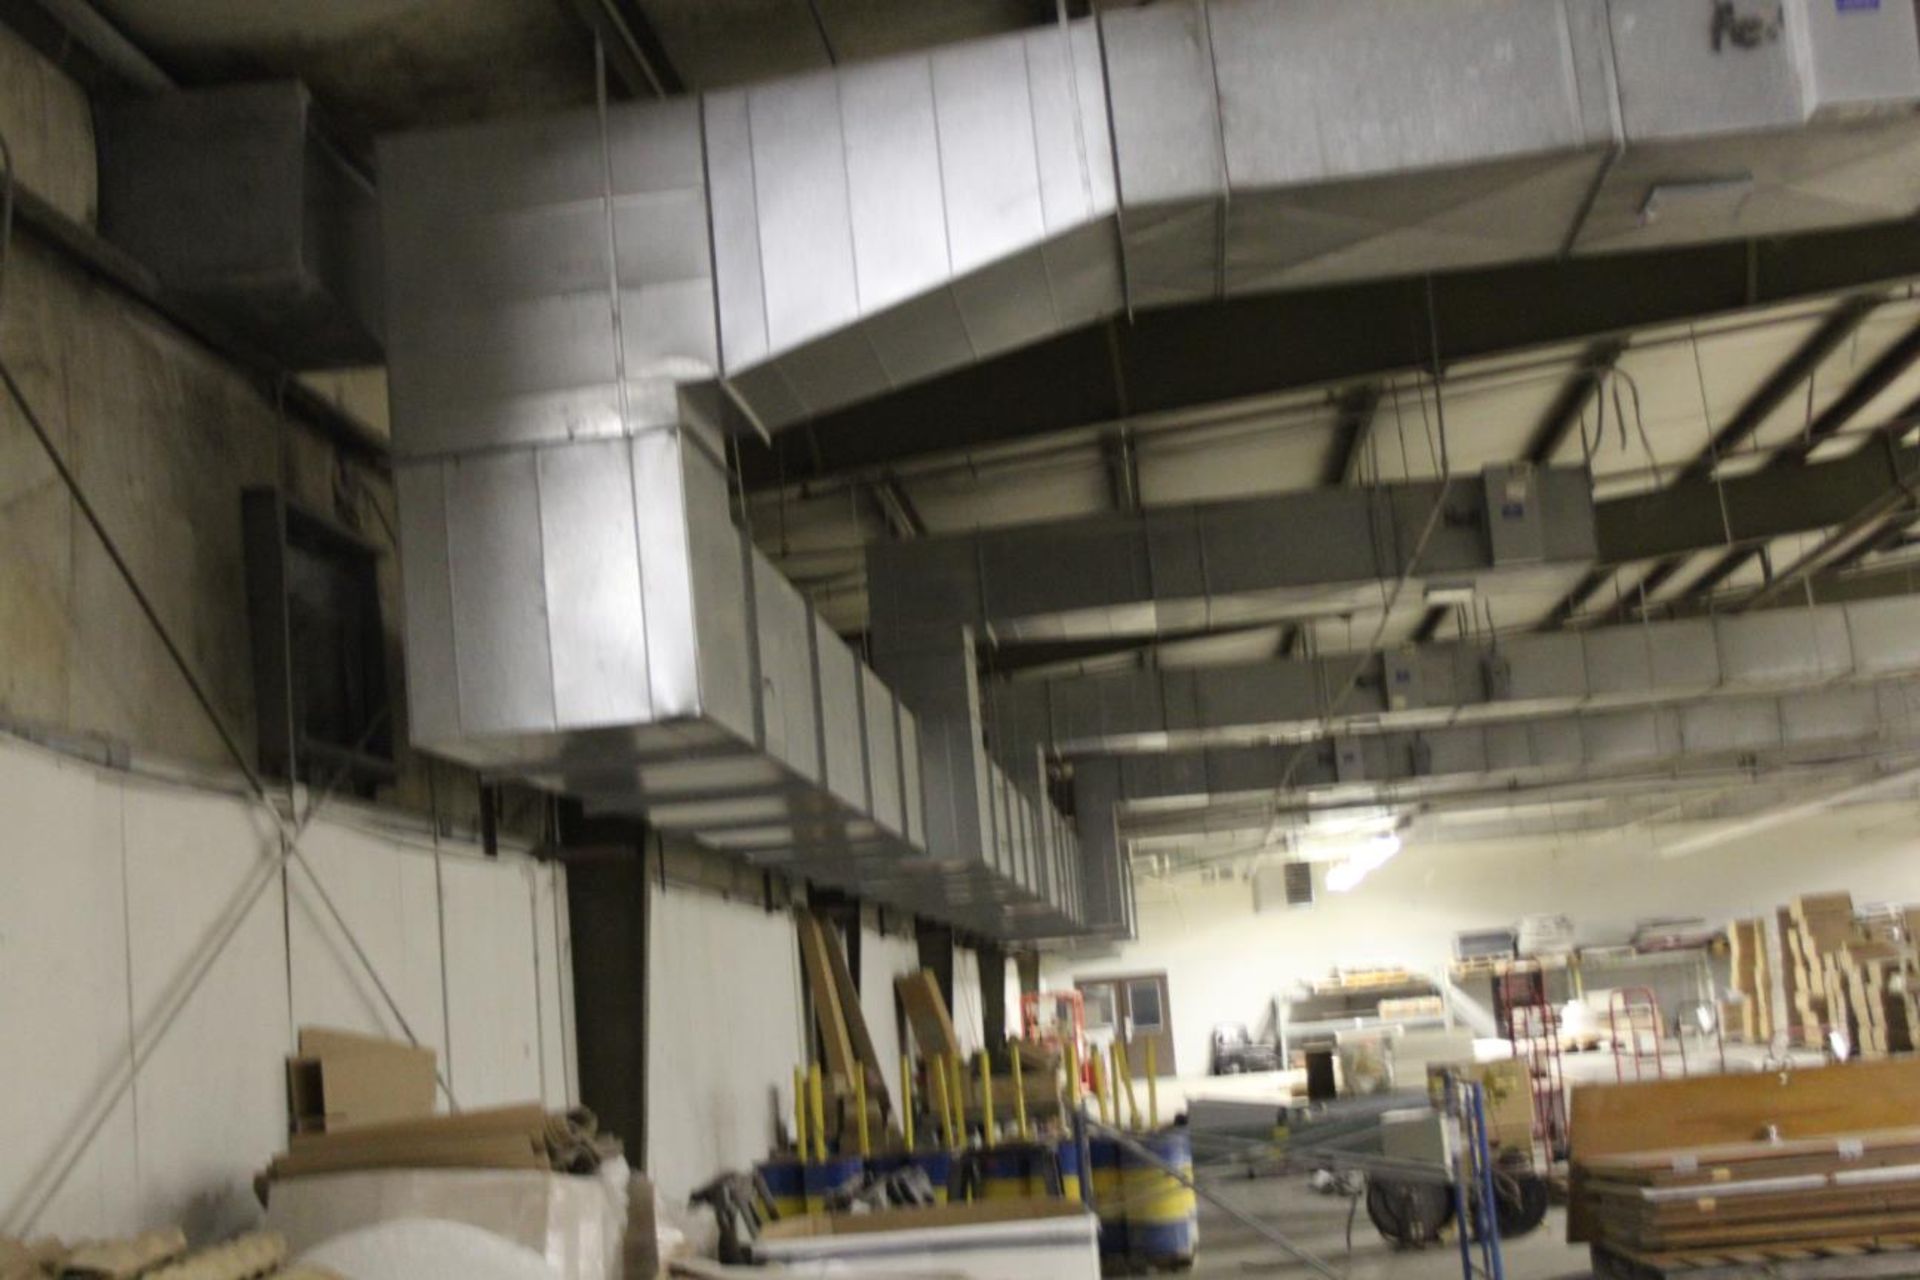 Square Duct Work, All of the sqare duct in the warehouse portion of the building. Office Ducts Are - Image 6 of 6